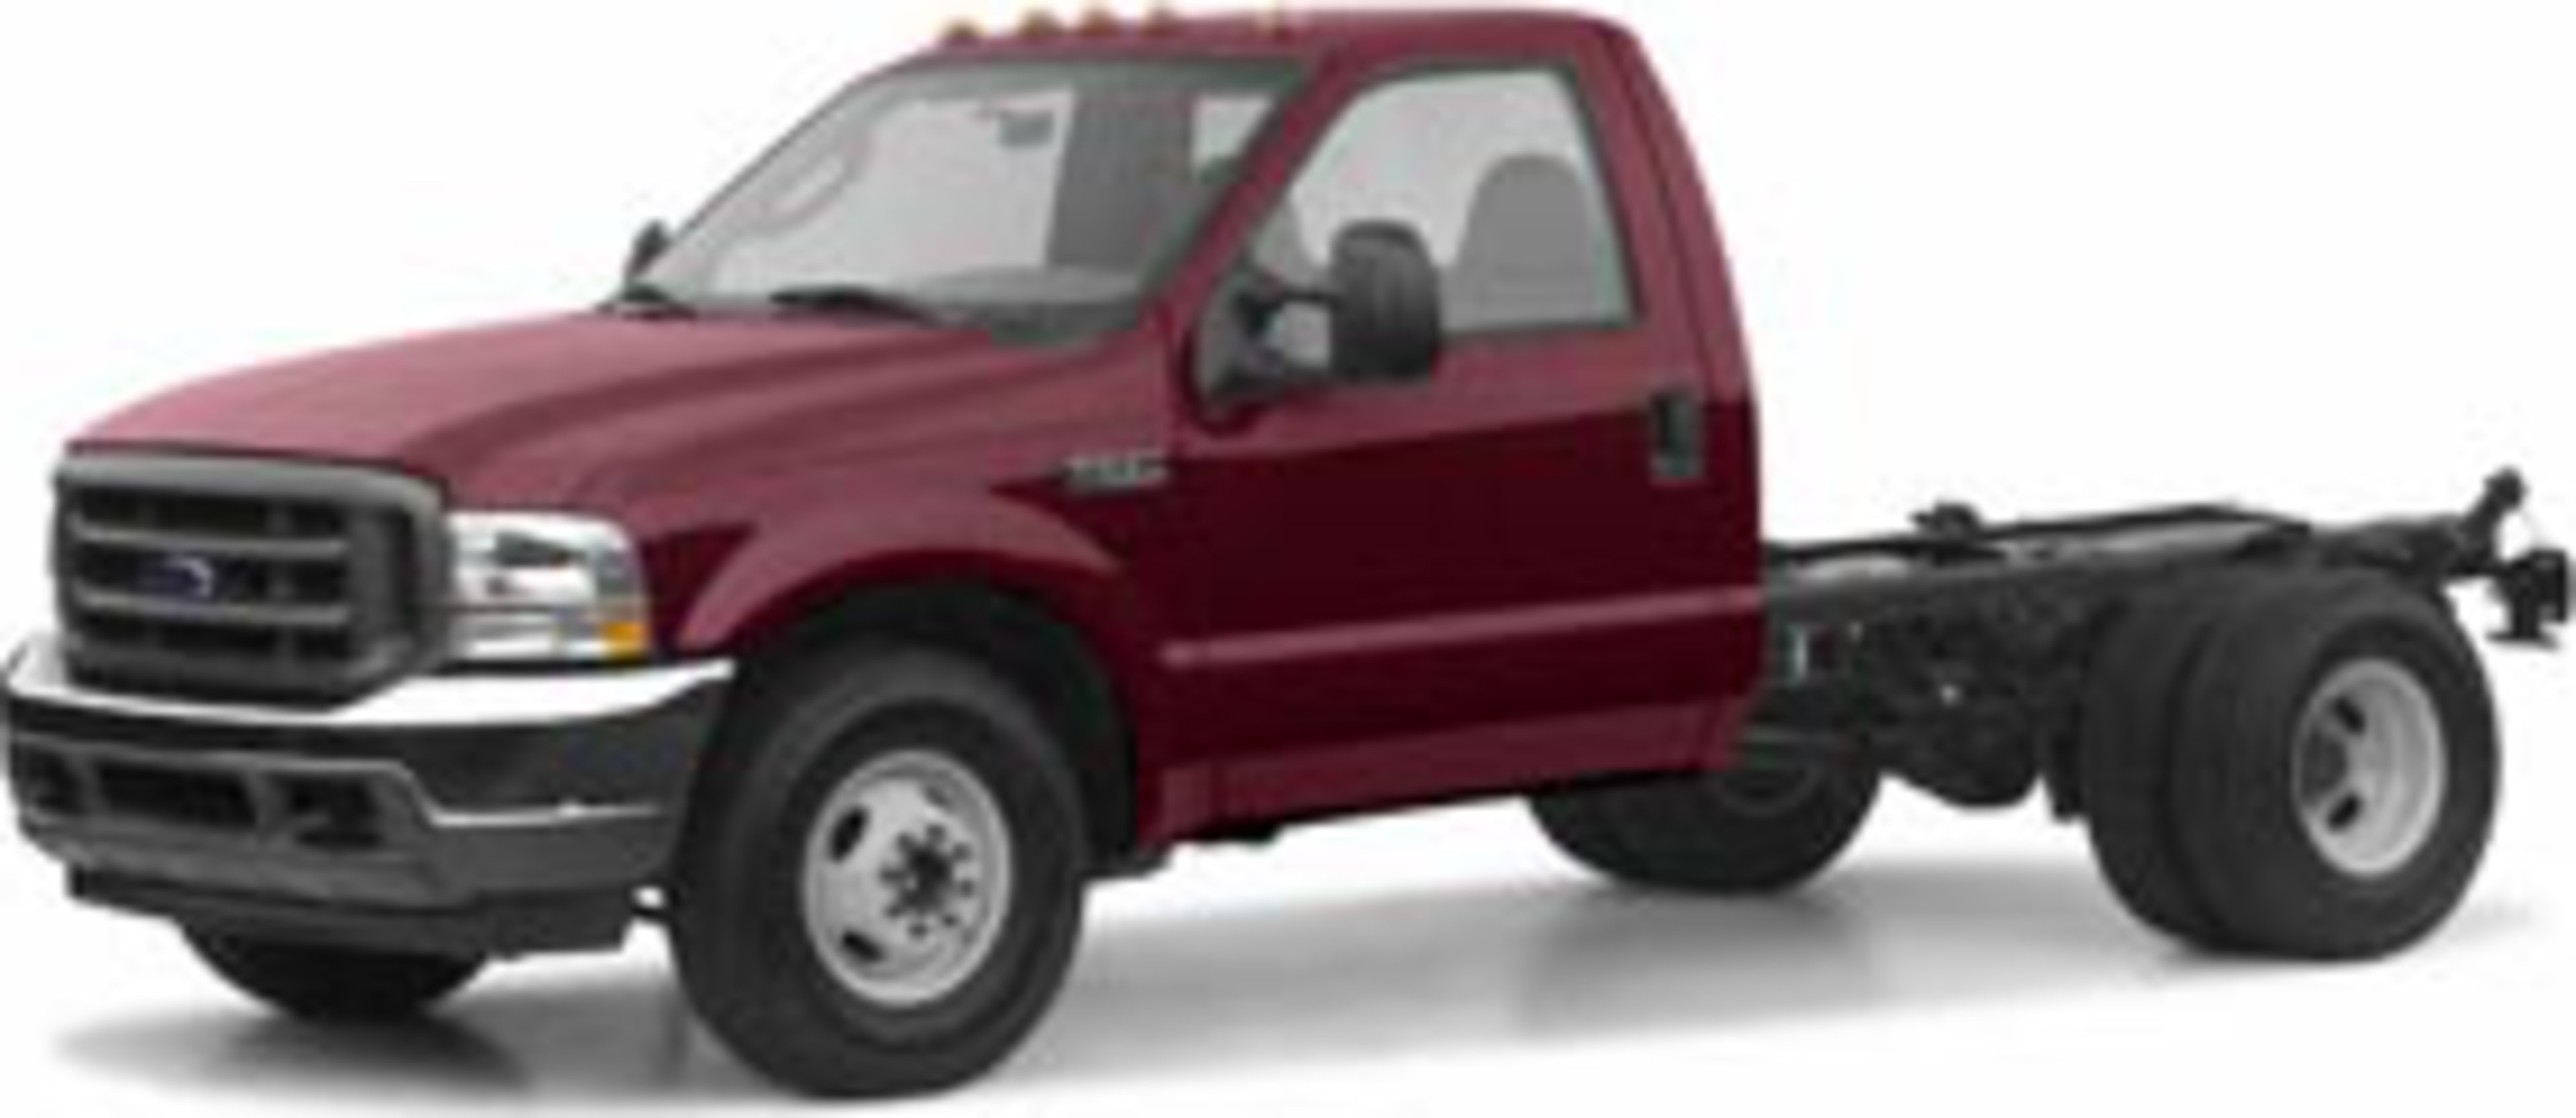 2004 Ford F-450 Super Duty Service and Repair Manual